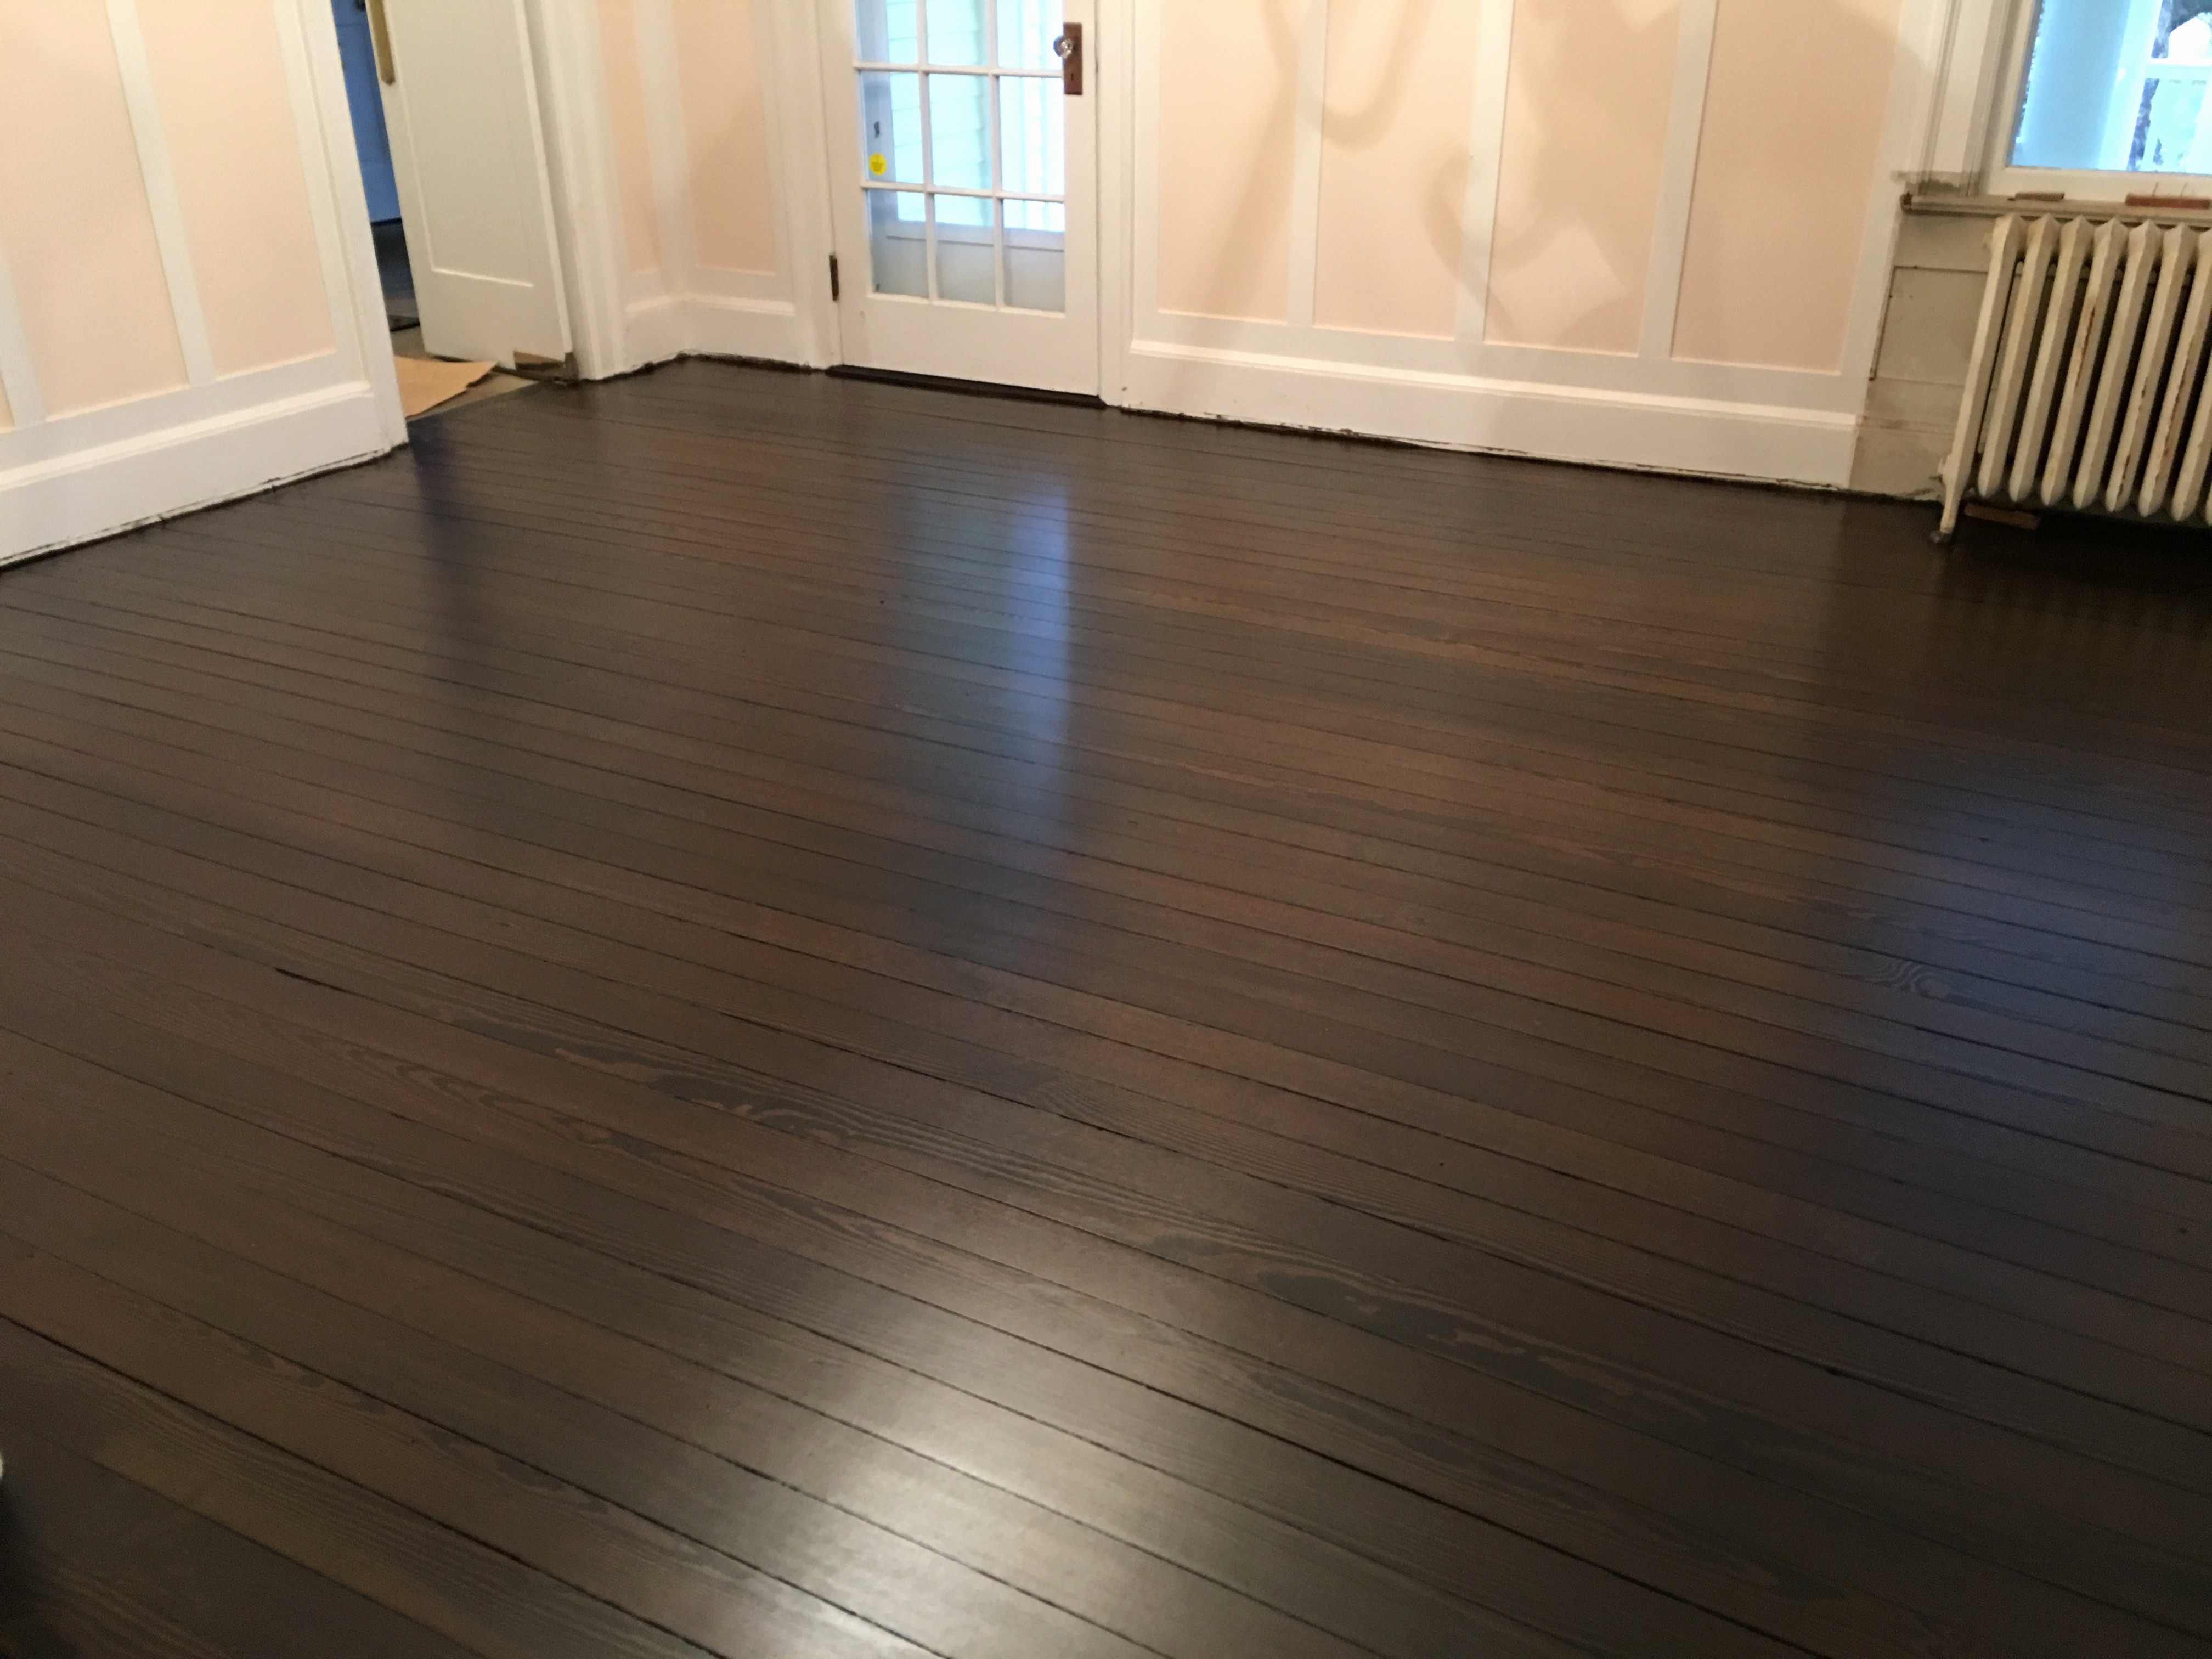 15 Recommended Hardwood Floor Epoxy Filler 2024 free download hardwood floor epoxy filler of hardwoodfloor low voc canada archives wlcu within hardwood floor color trends 2017 elegant wood floor color trends cheap laminate wood flooring hardwood floor